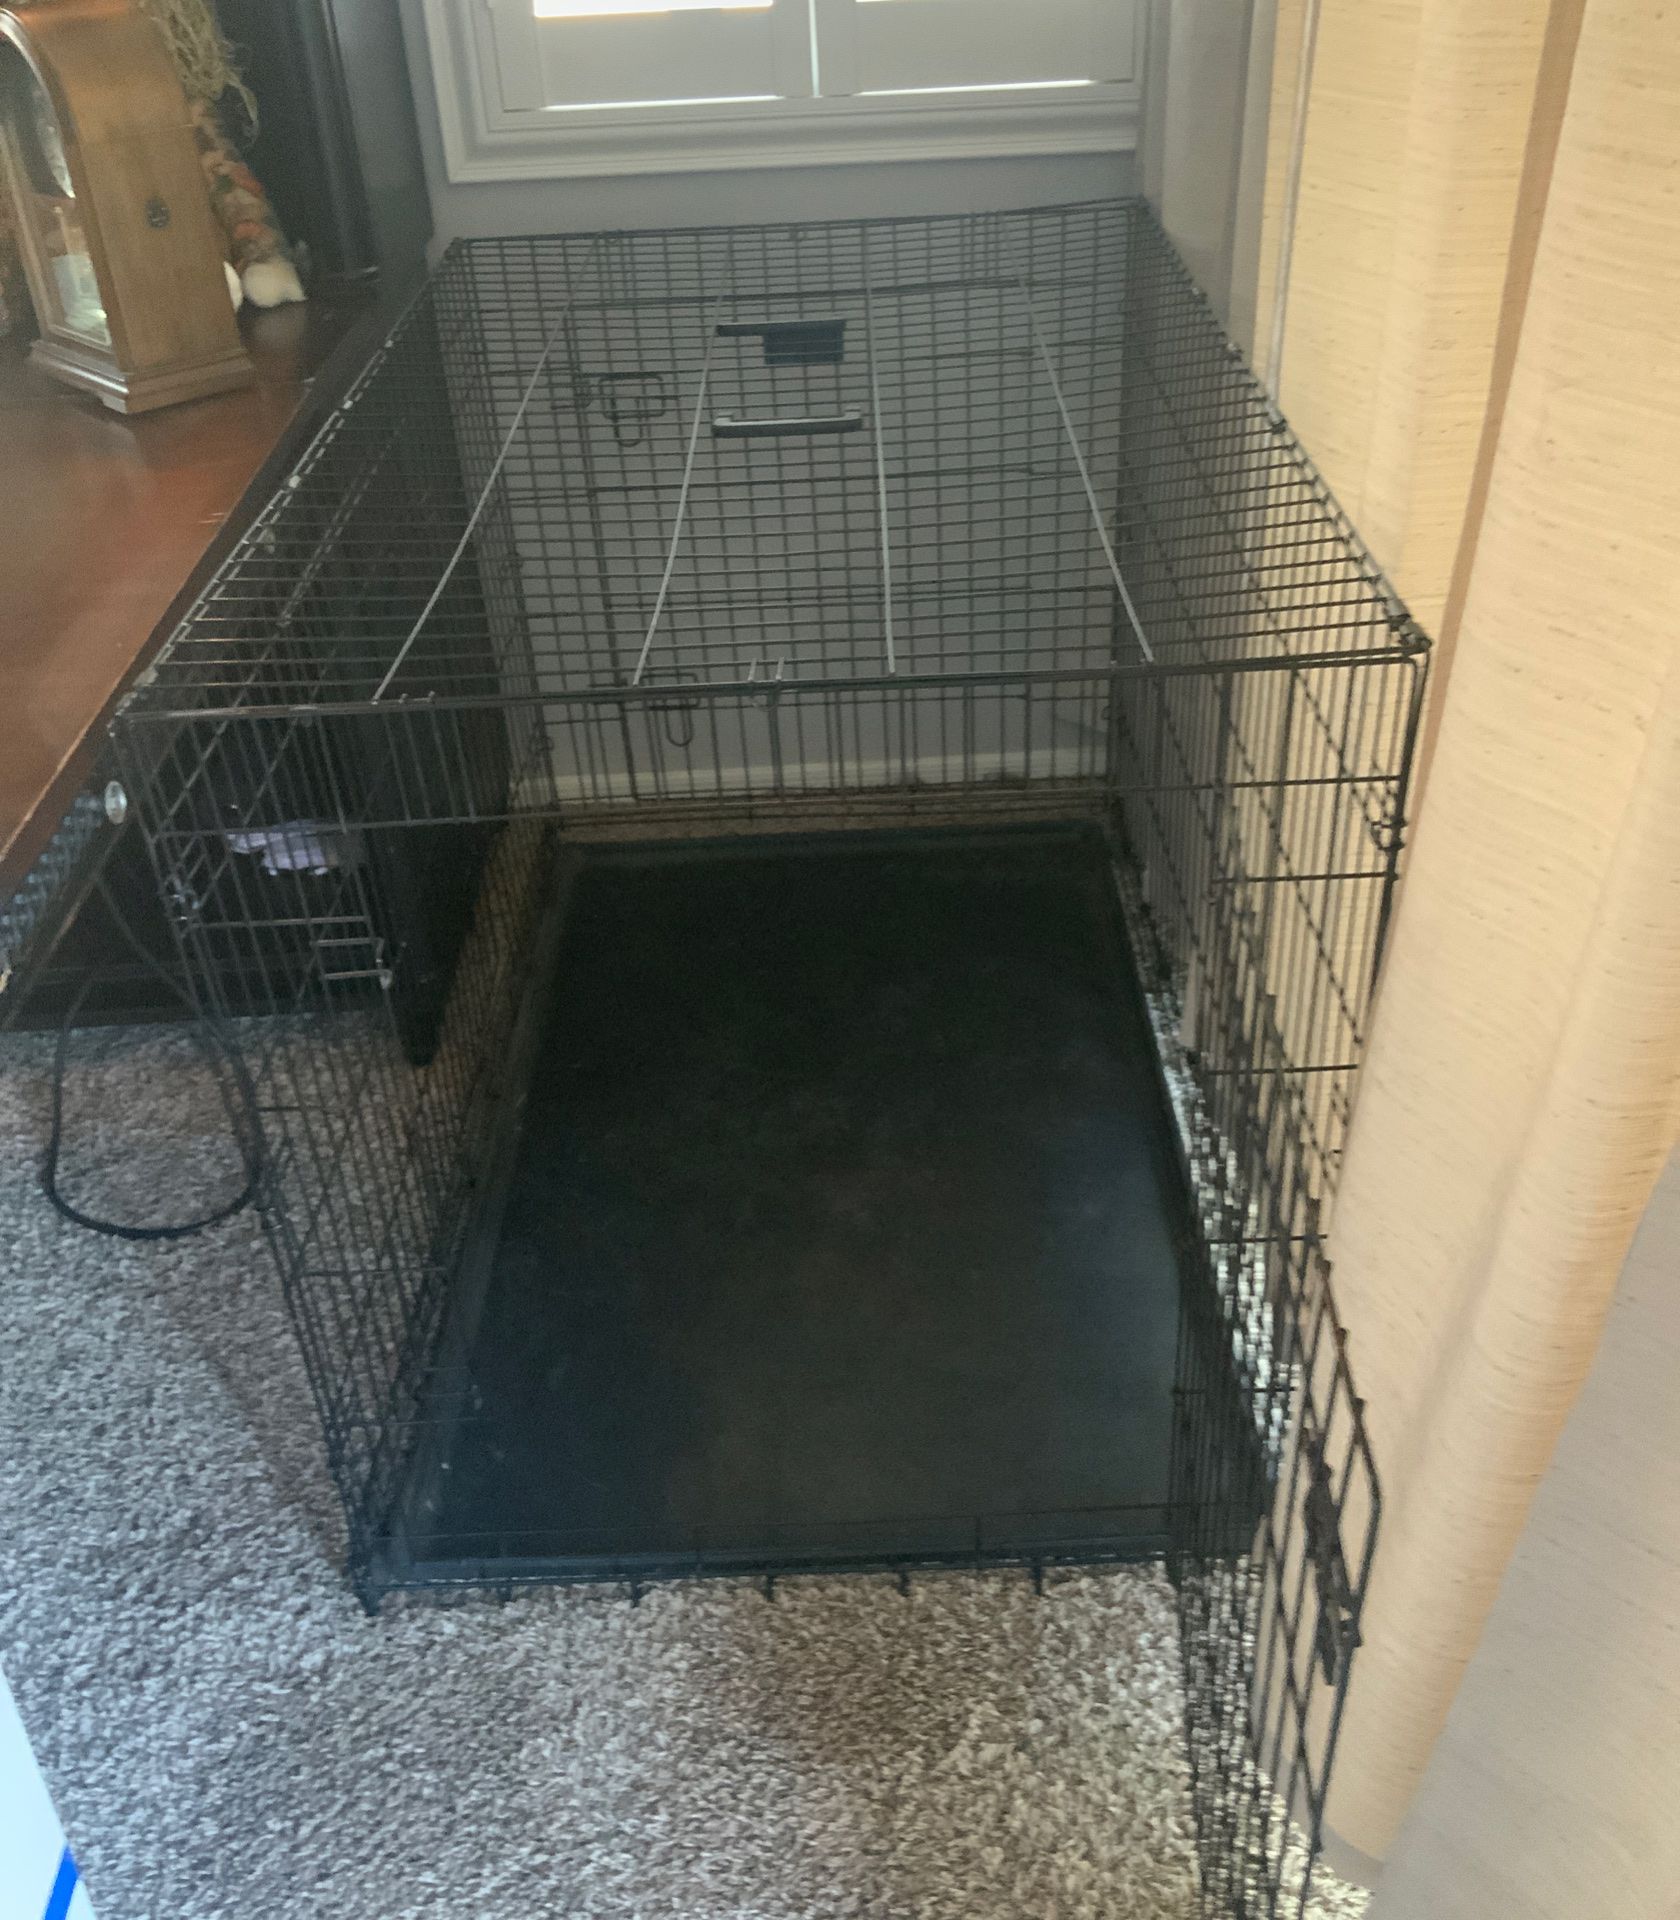 XL Dog crate like new $75